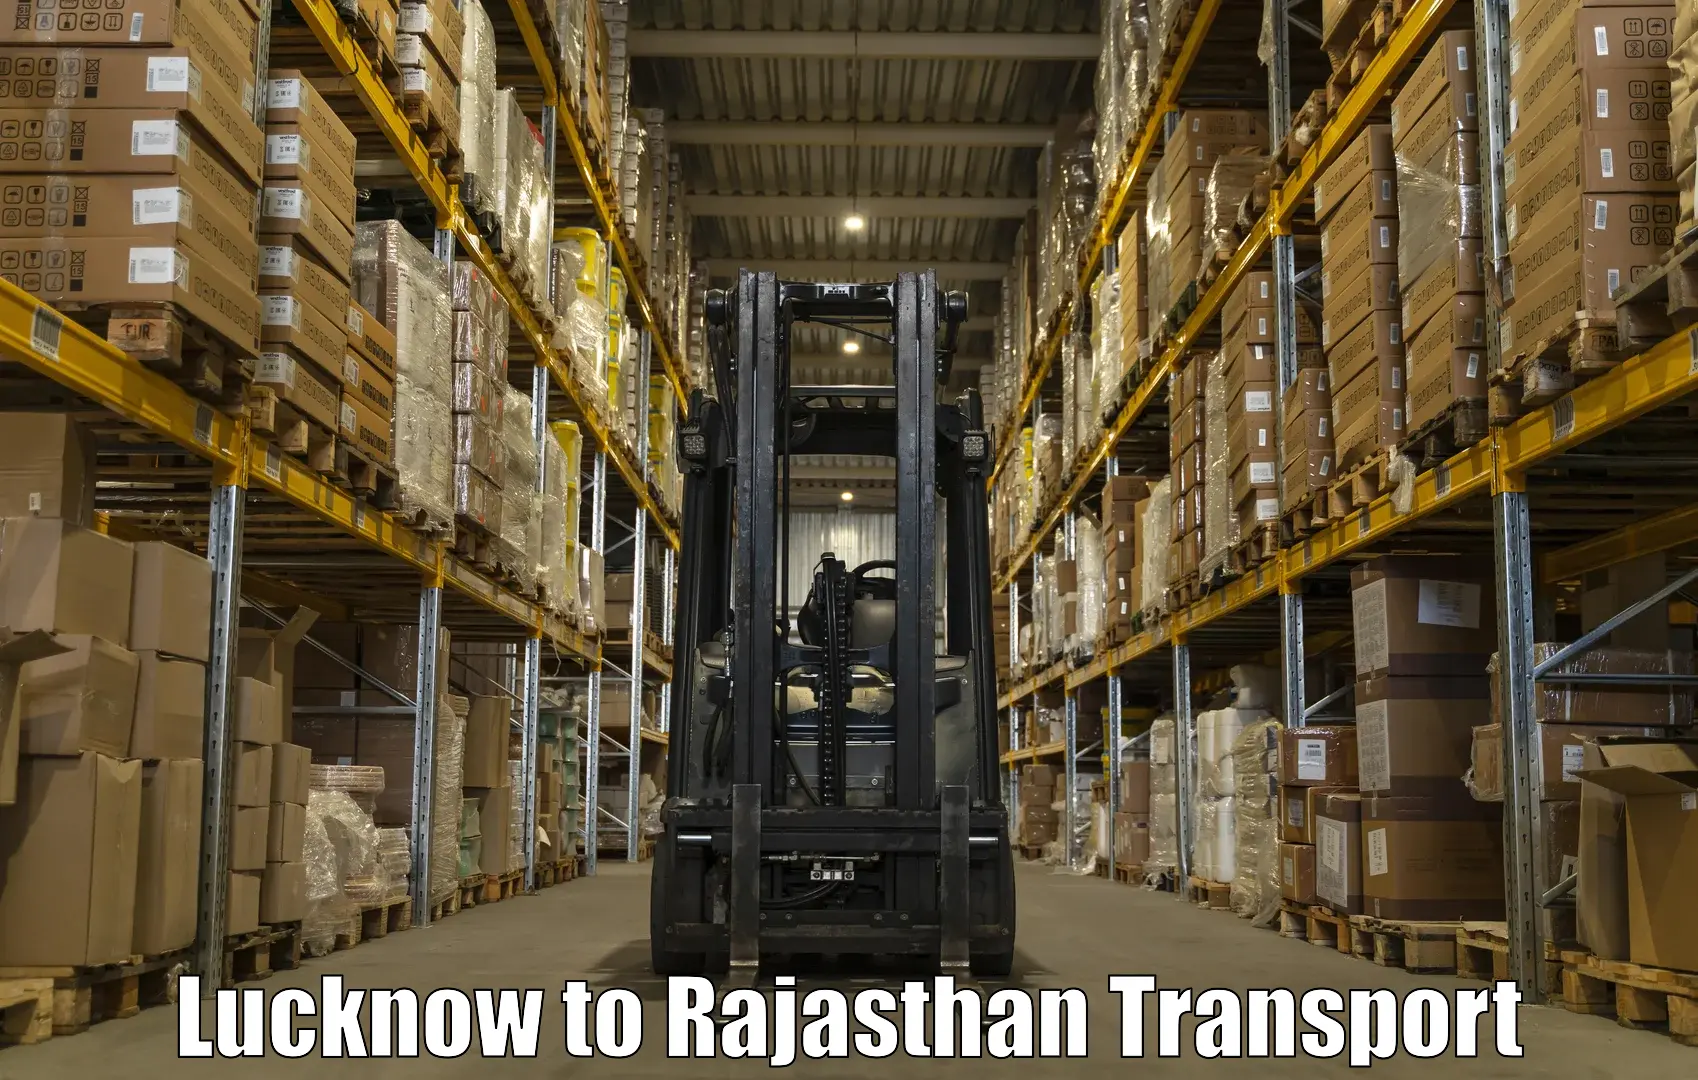 Daily transport service Lucknow to Rajasthan